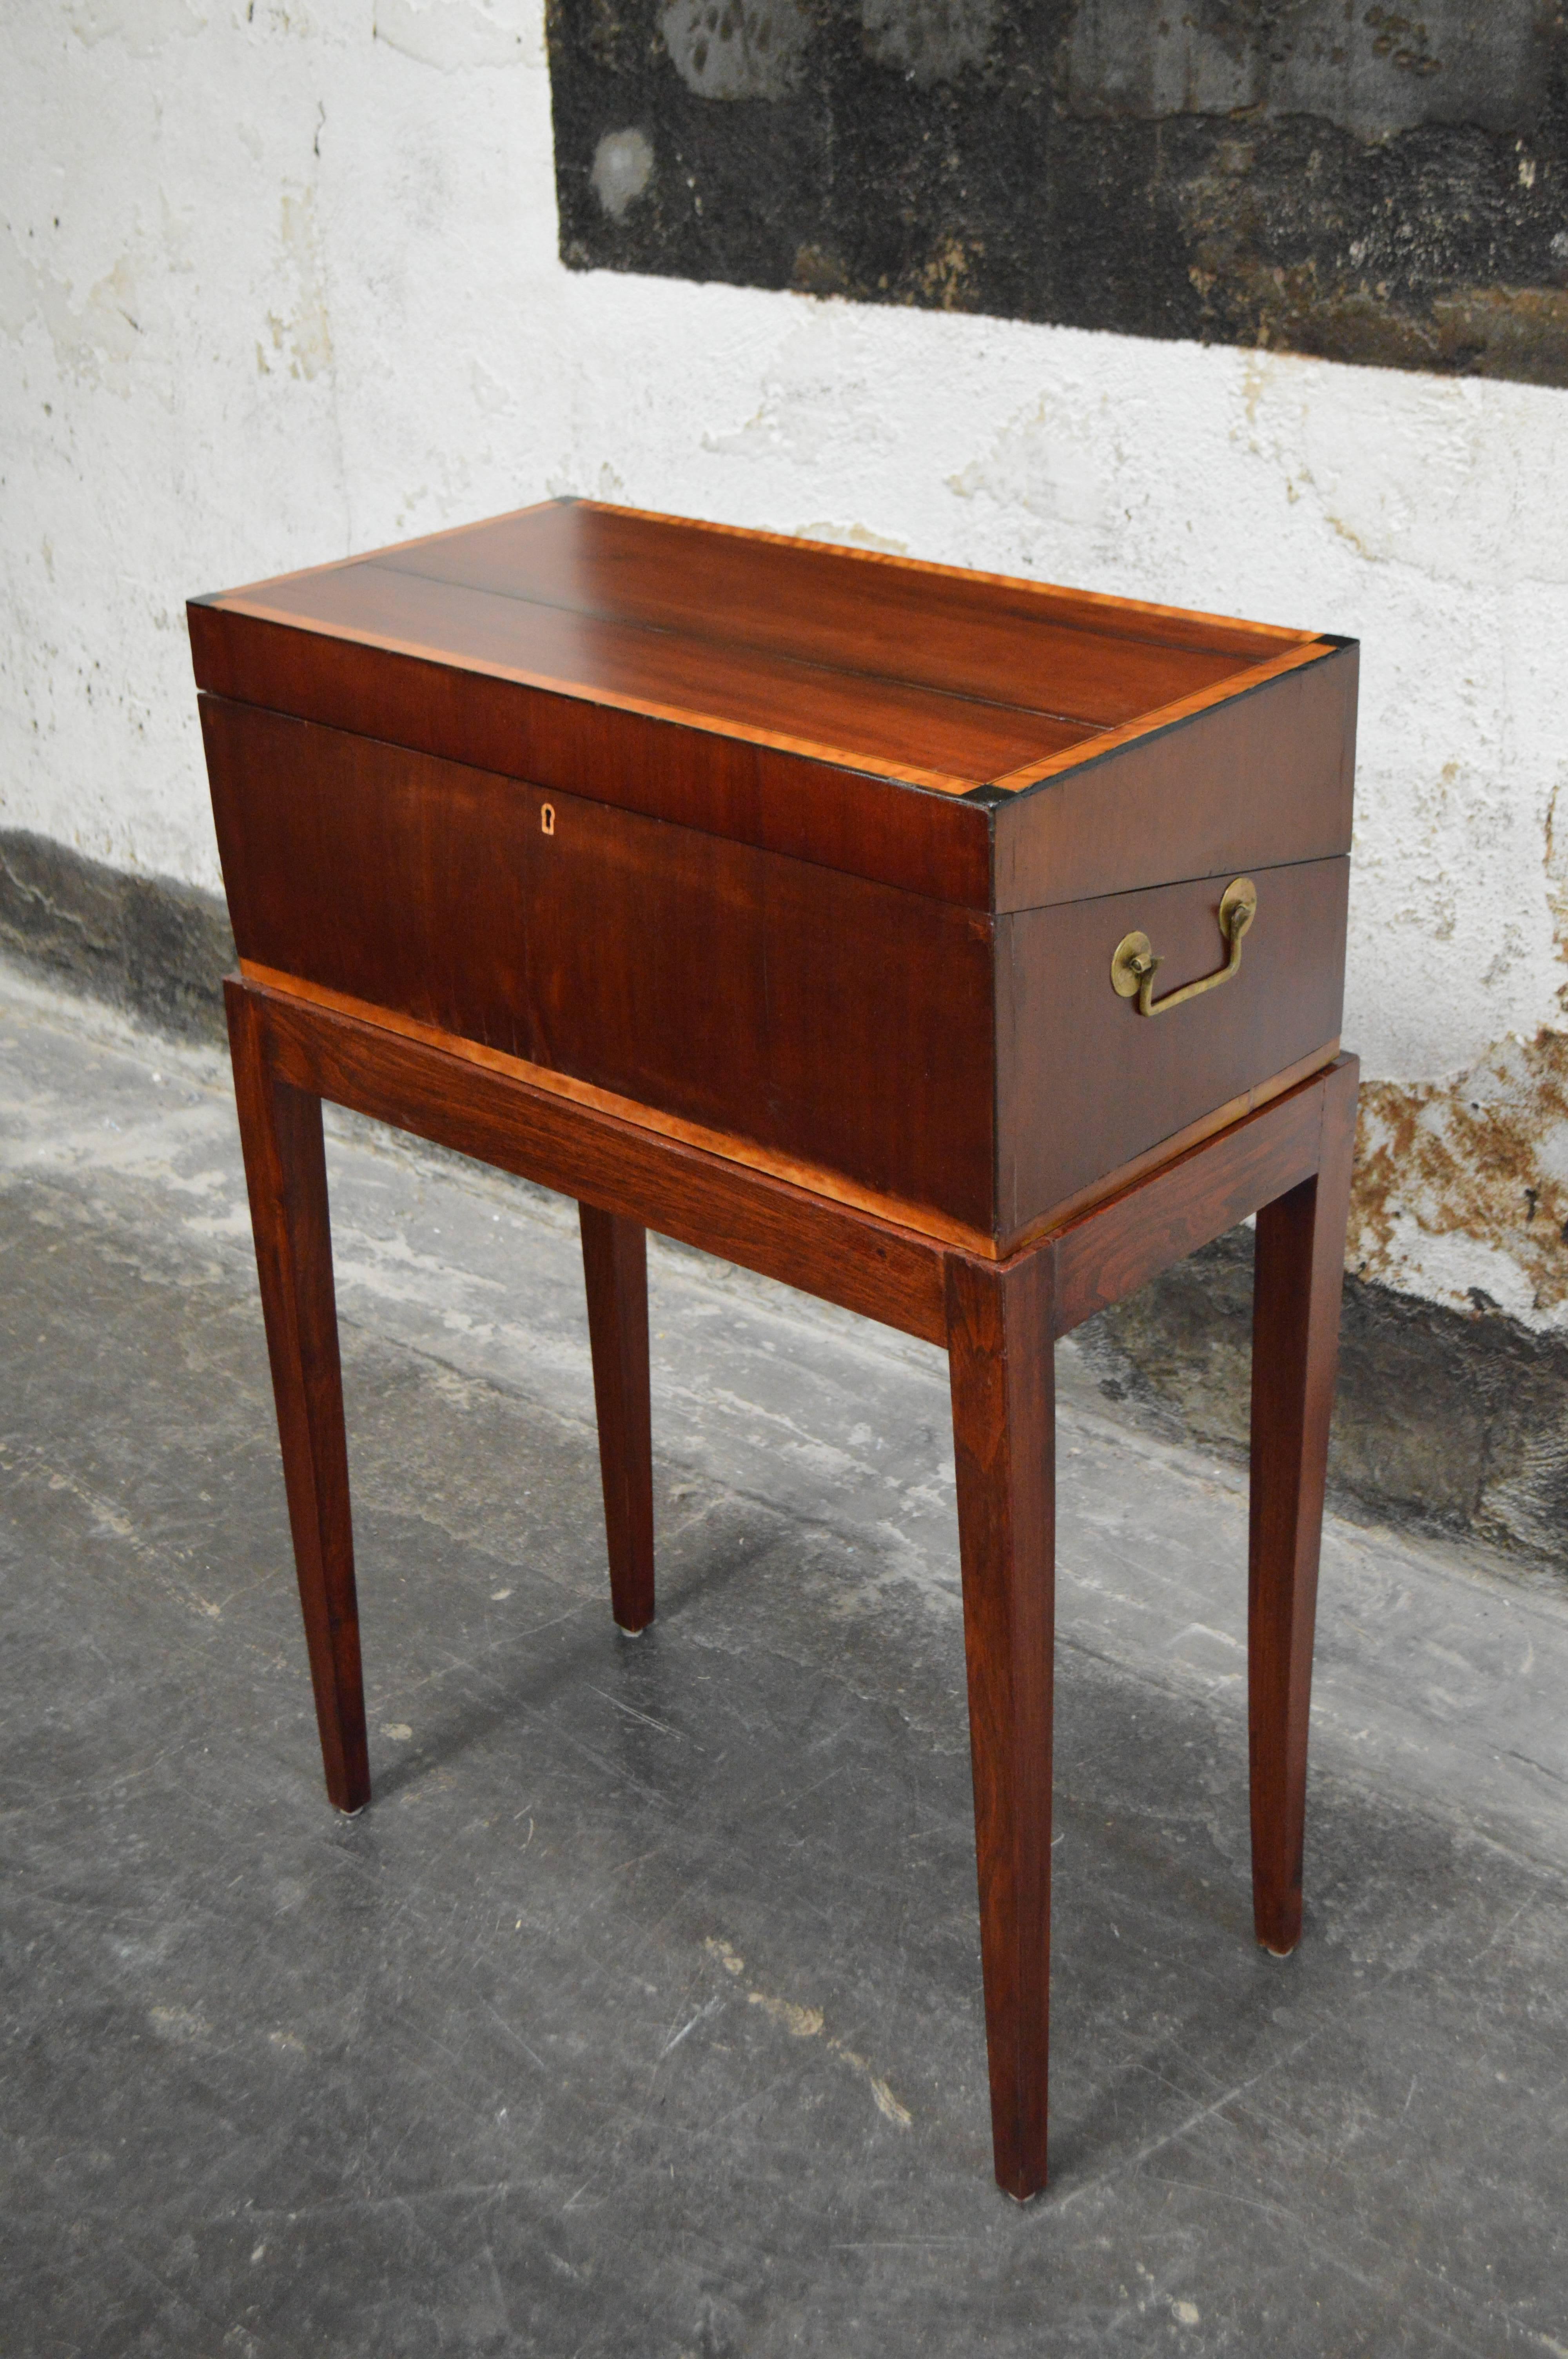 Antique mahogany intarsia writing box or lap desk on rosewood stand. Opening it up reveals a dished pen tray flanked by space for inkwells. Beneath the writing slope is a small letter well. Brass handles adorn the sides and also has a drawer section